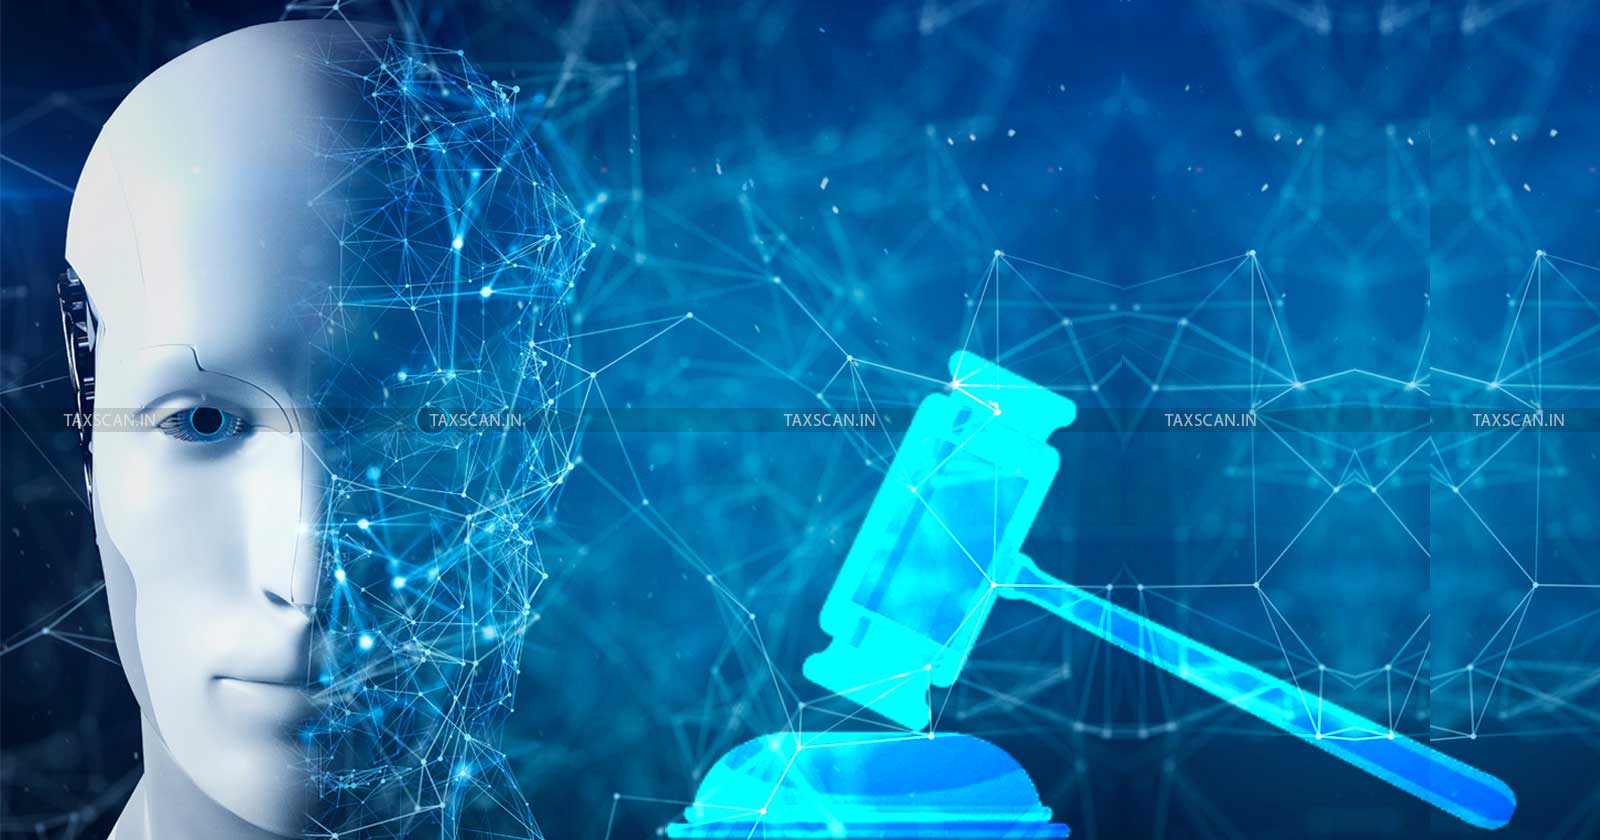 PMLA Act in Era of AI Technology - Era of AI Technology - PMLA Act - AI Technology - Artificial Intelligence - Supreme Court Directs to Conclude Trial in Reasonable Time - Supreme Court Directs - TAXSCAN